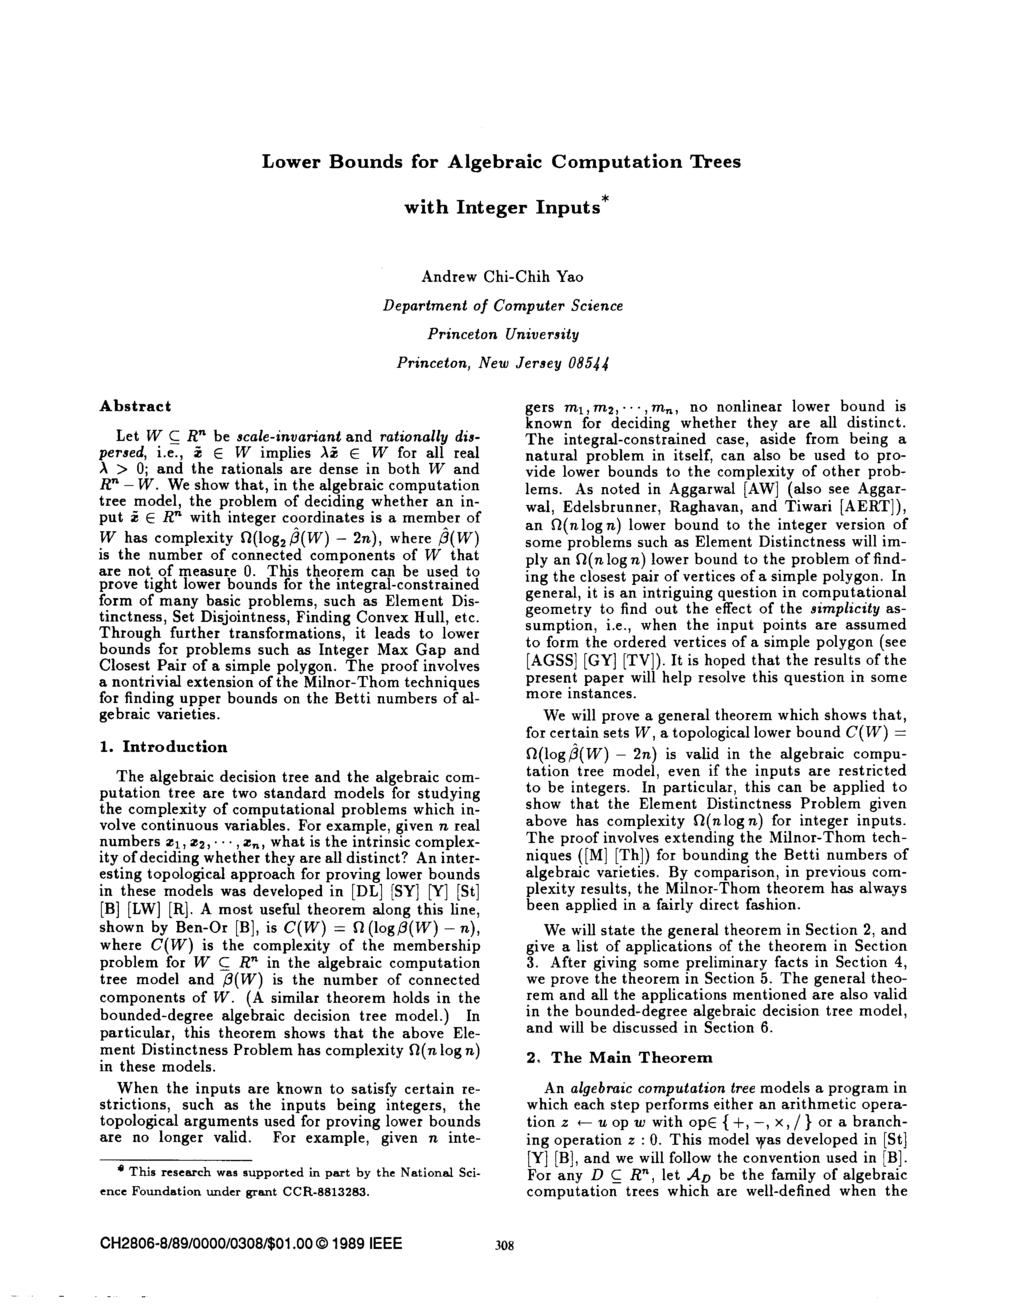 Computational complexity of closest-pair problem Theorem. [Ben-Or 1983, Yao 1989] In quadratic decision tree model, any algorithm for closest pair (even in 1D) requires Ω(n log n) quadratic tests.